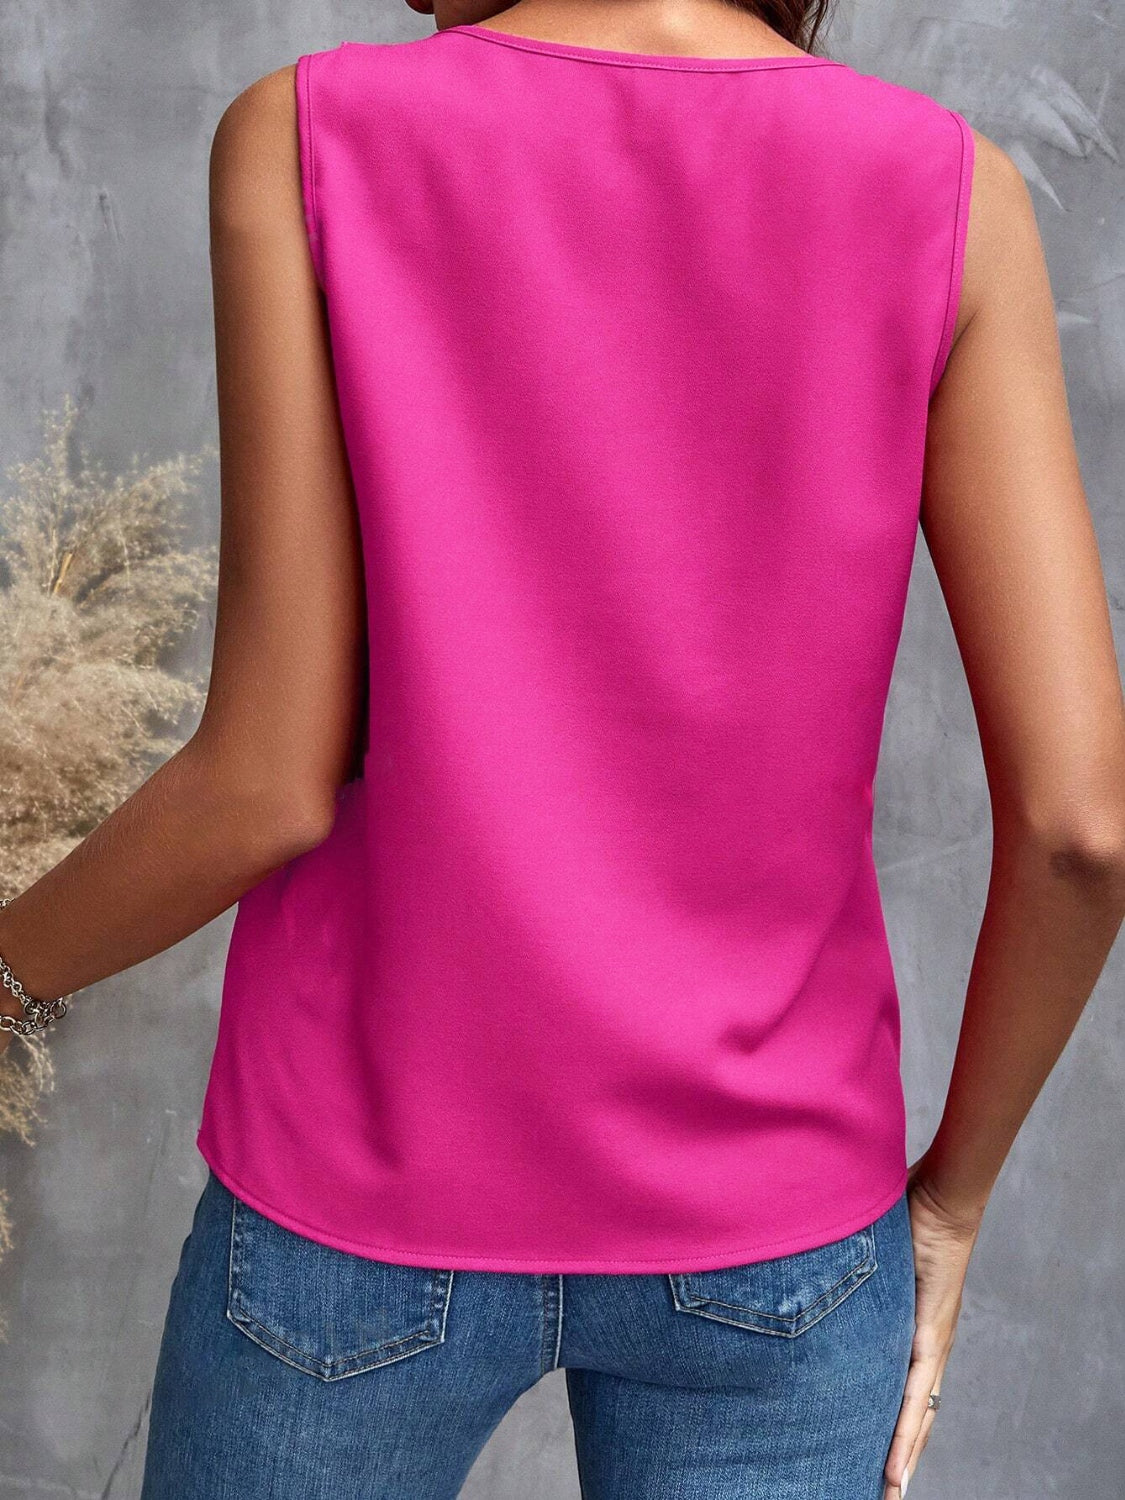 Woman in a chic pink ruffle sleeveless top, perfect for casual and stylish summer looks